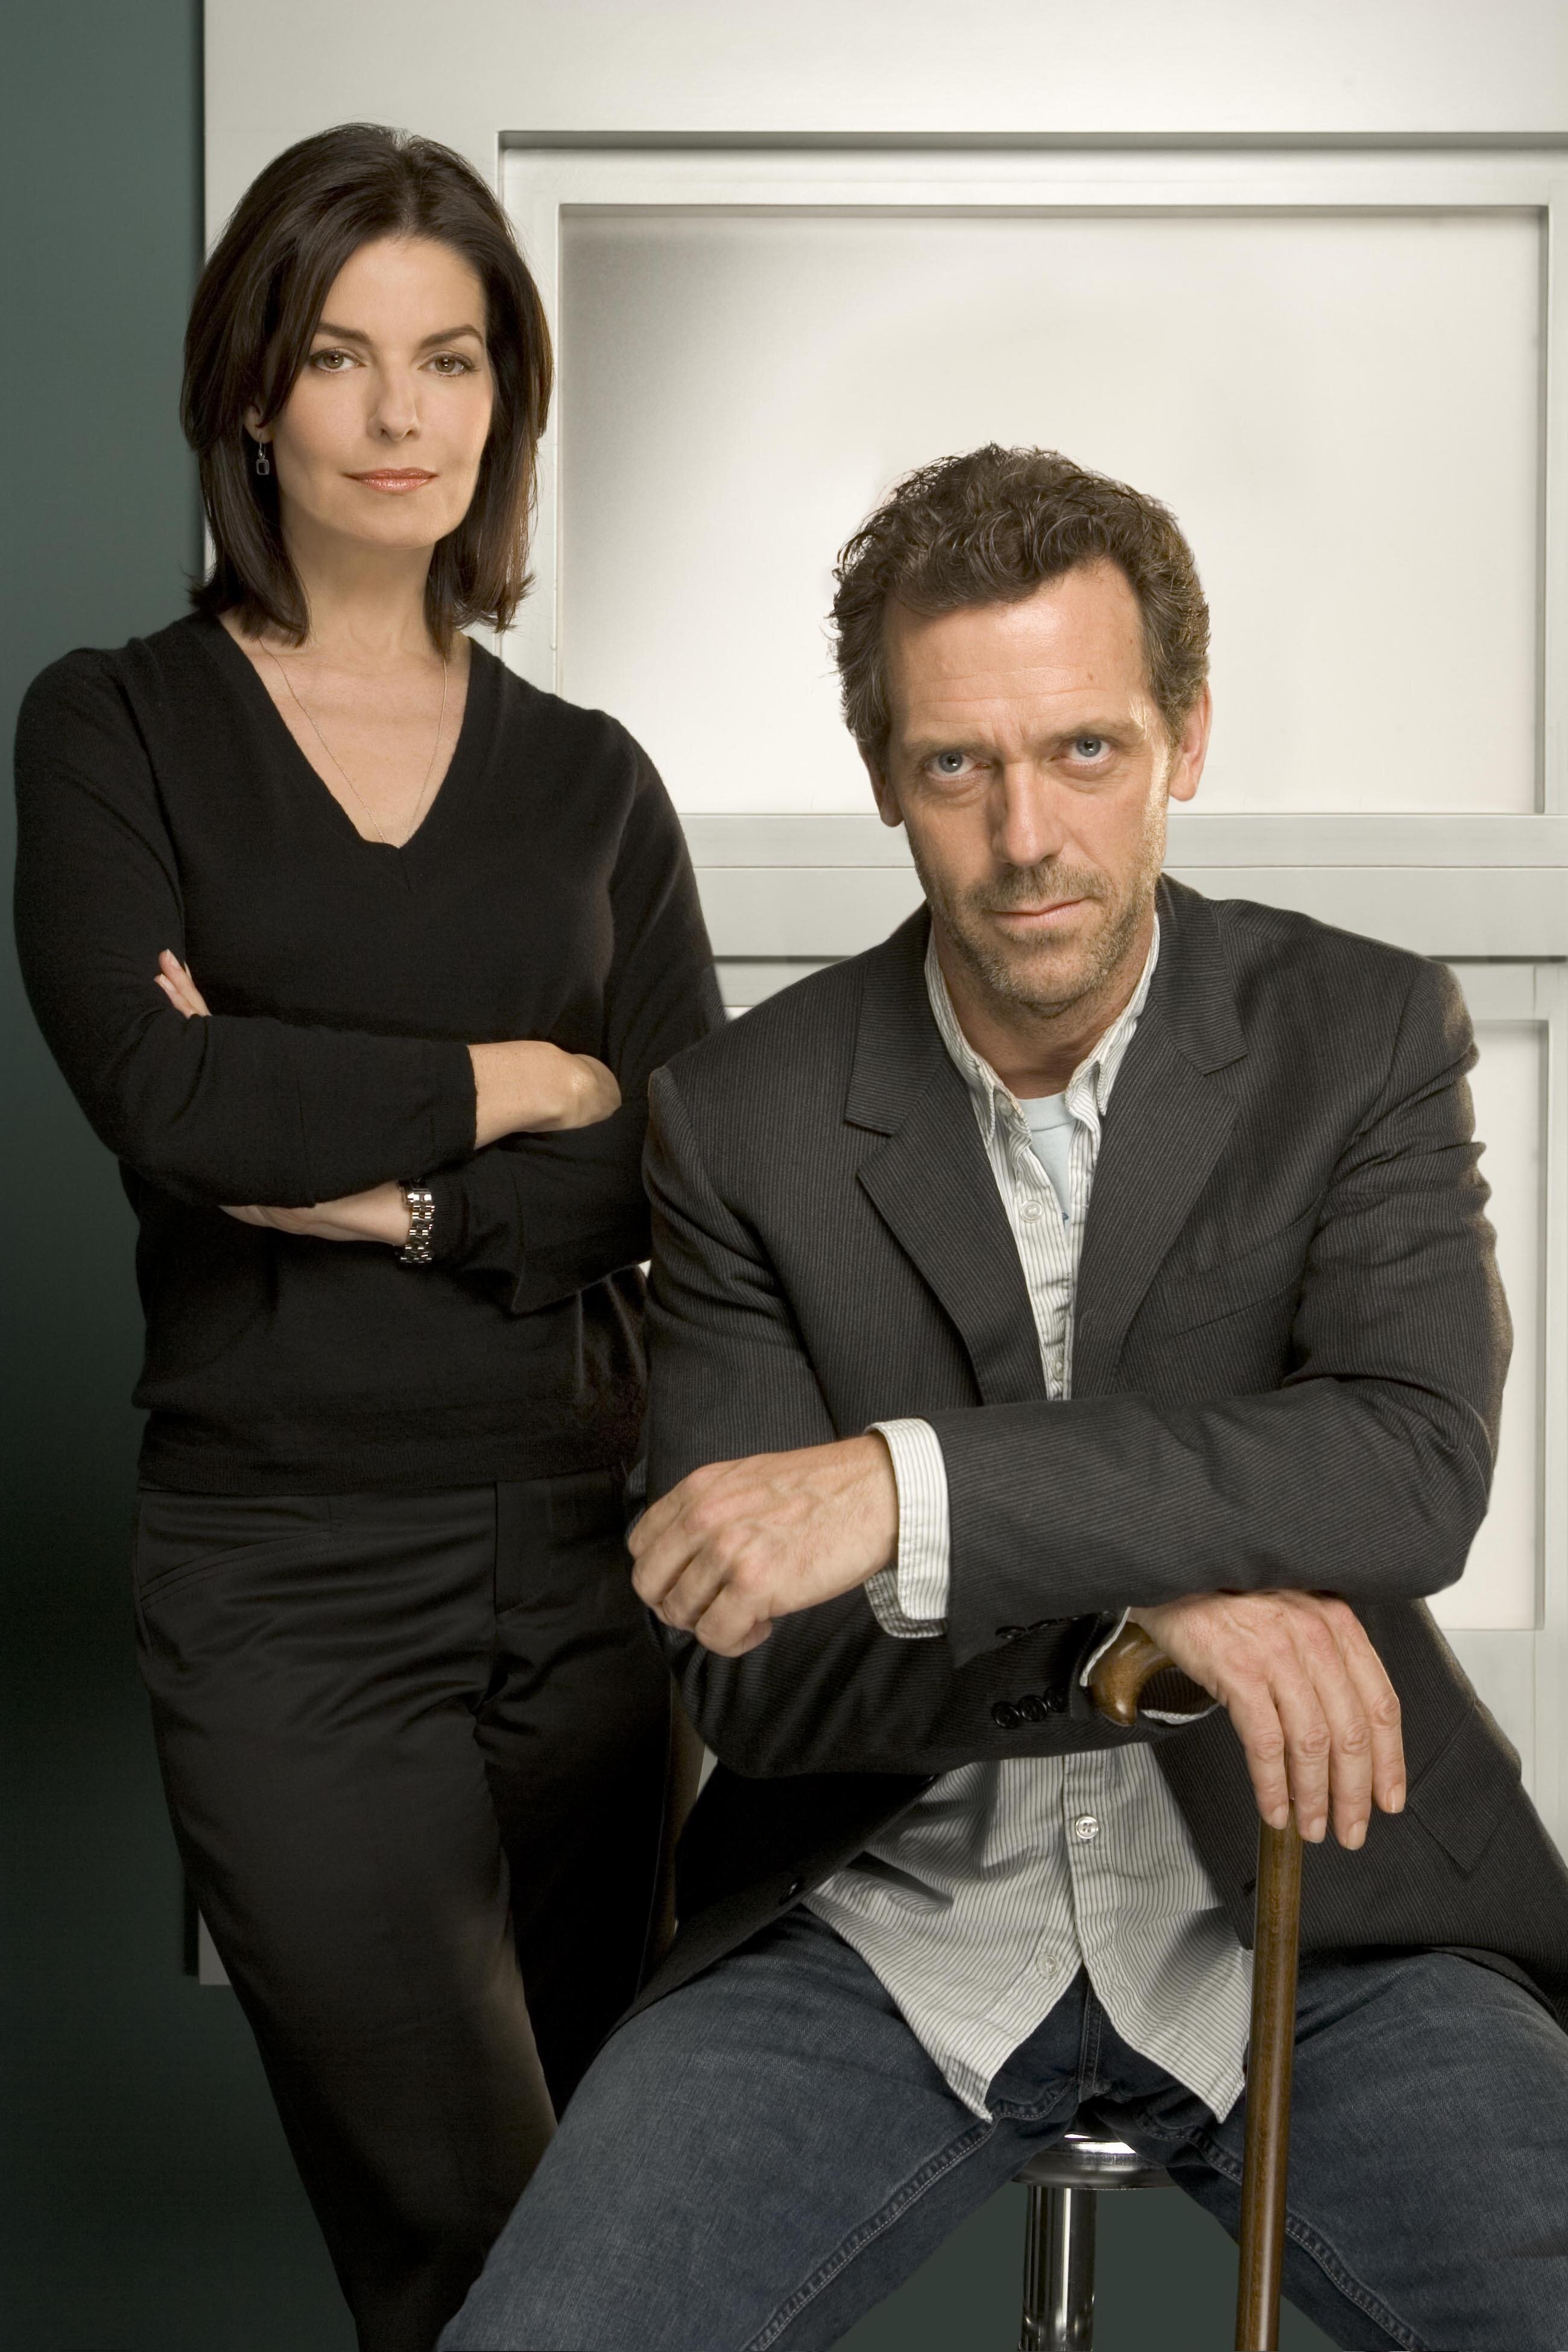 Dr House - Cours magistral